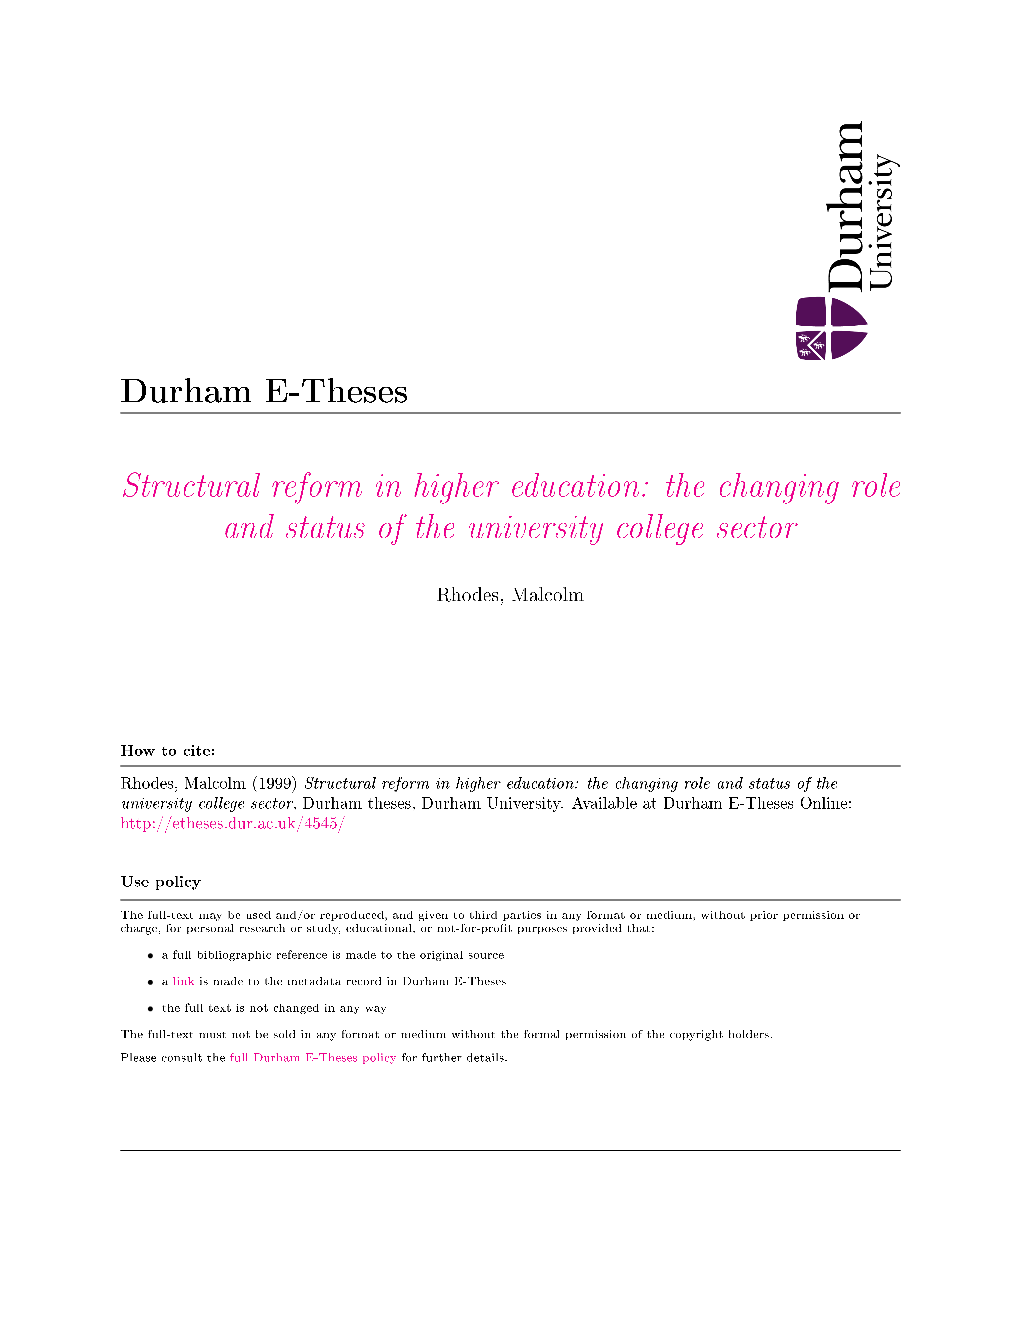 Structural Reform in Higher Education: the Changing Role and Status of the University College Sector